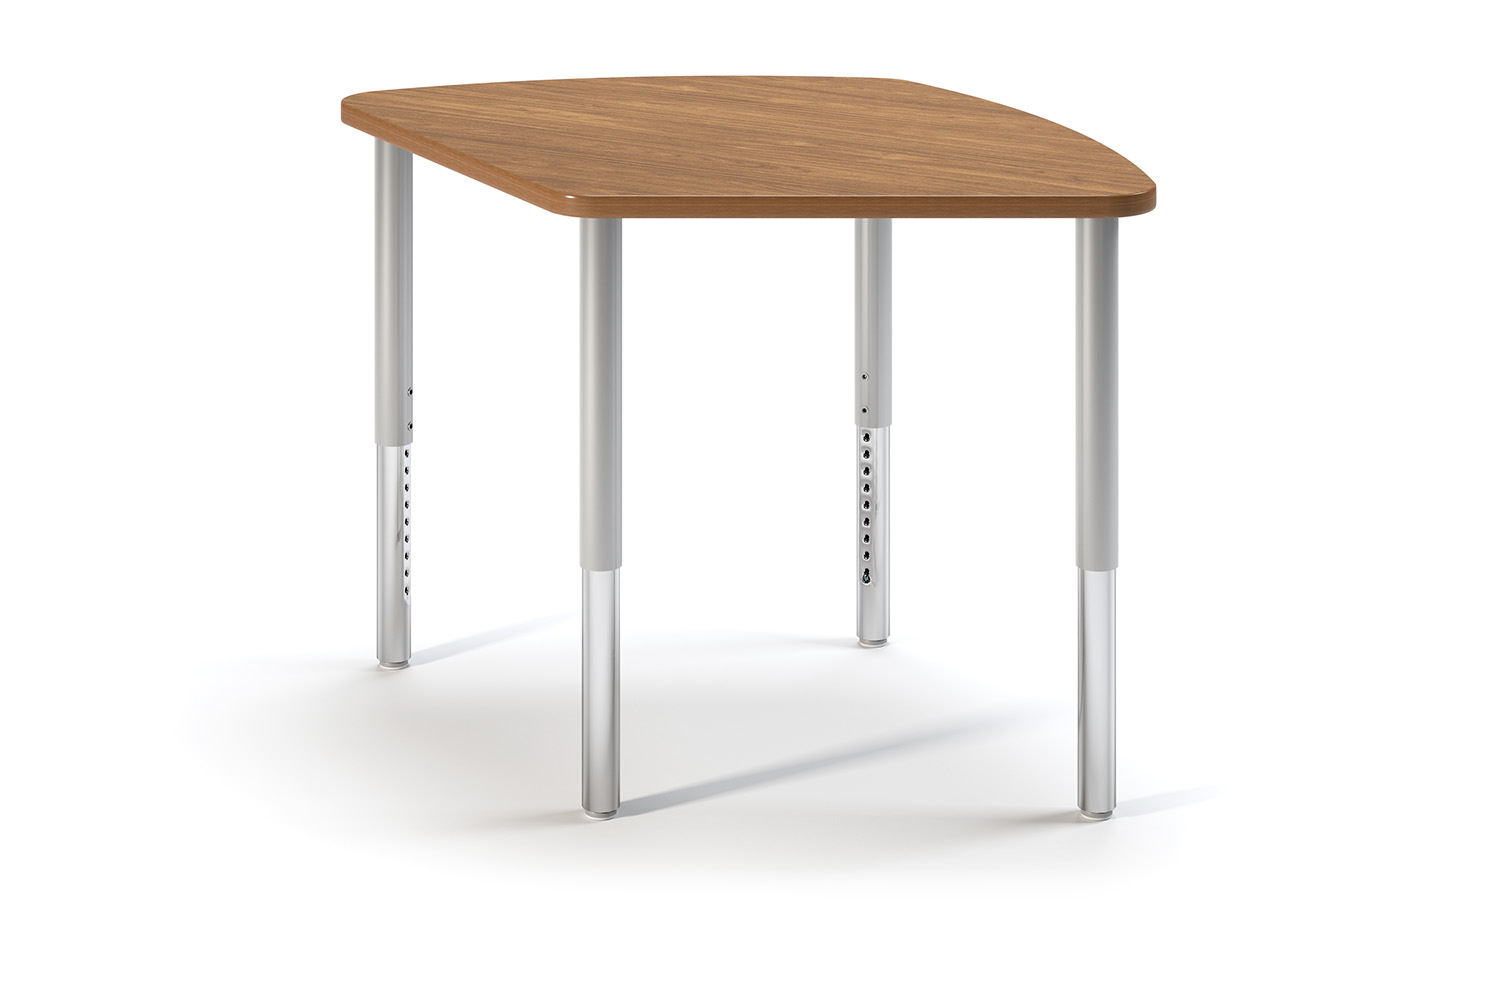 Mingle Tilted Square Table